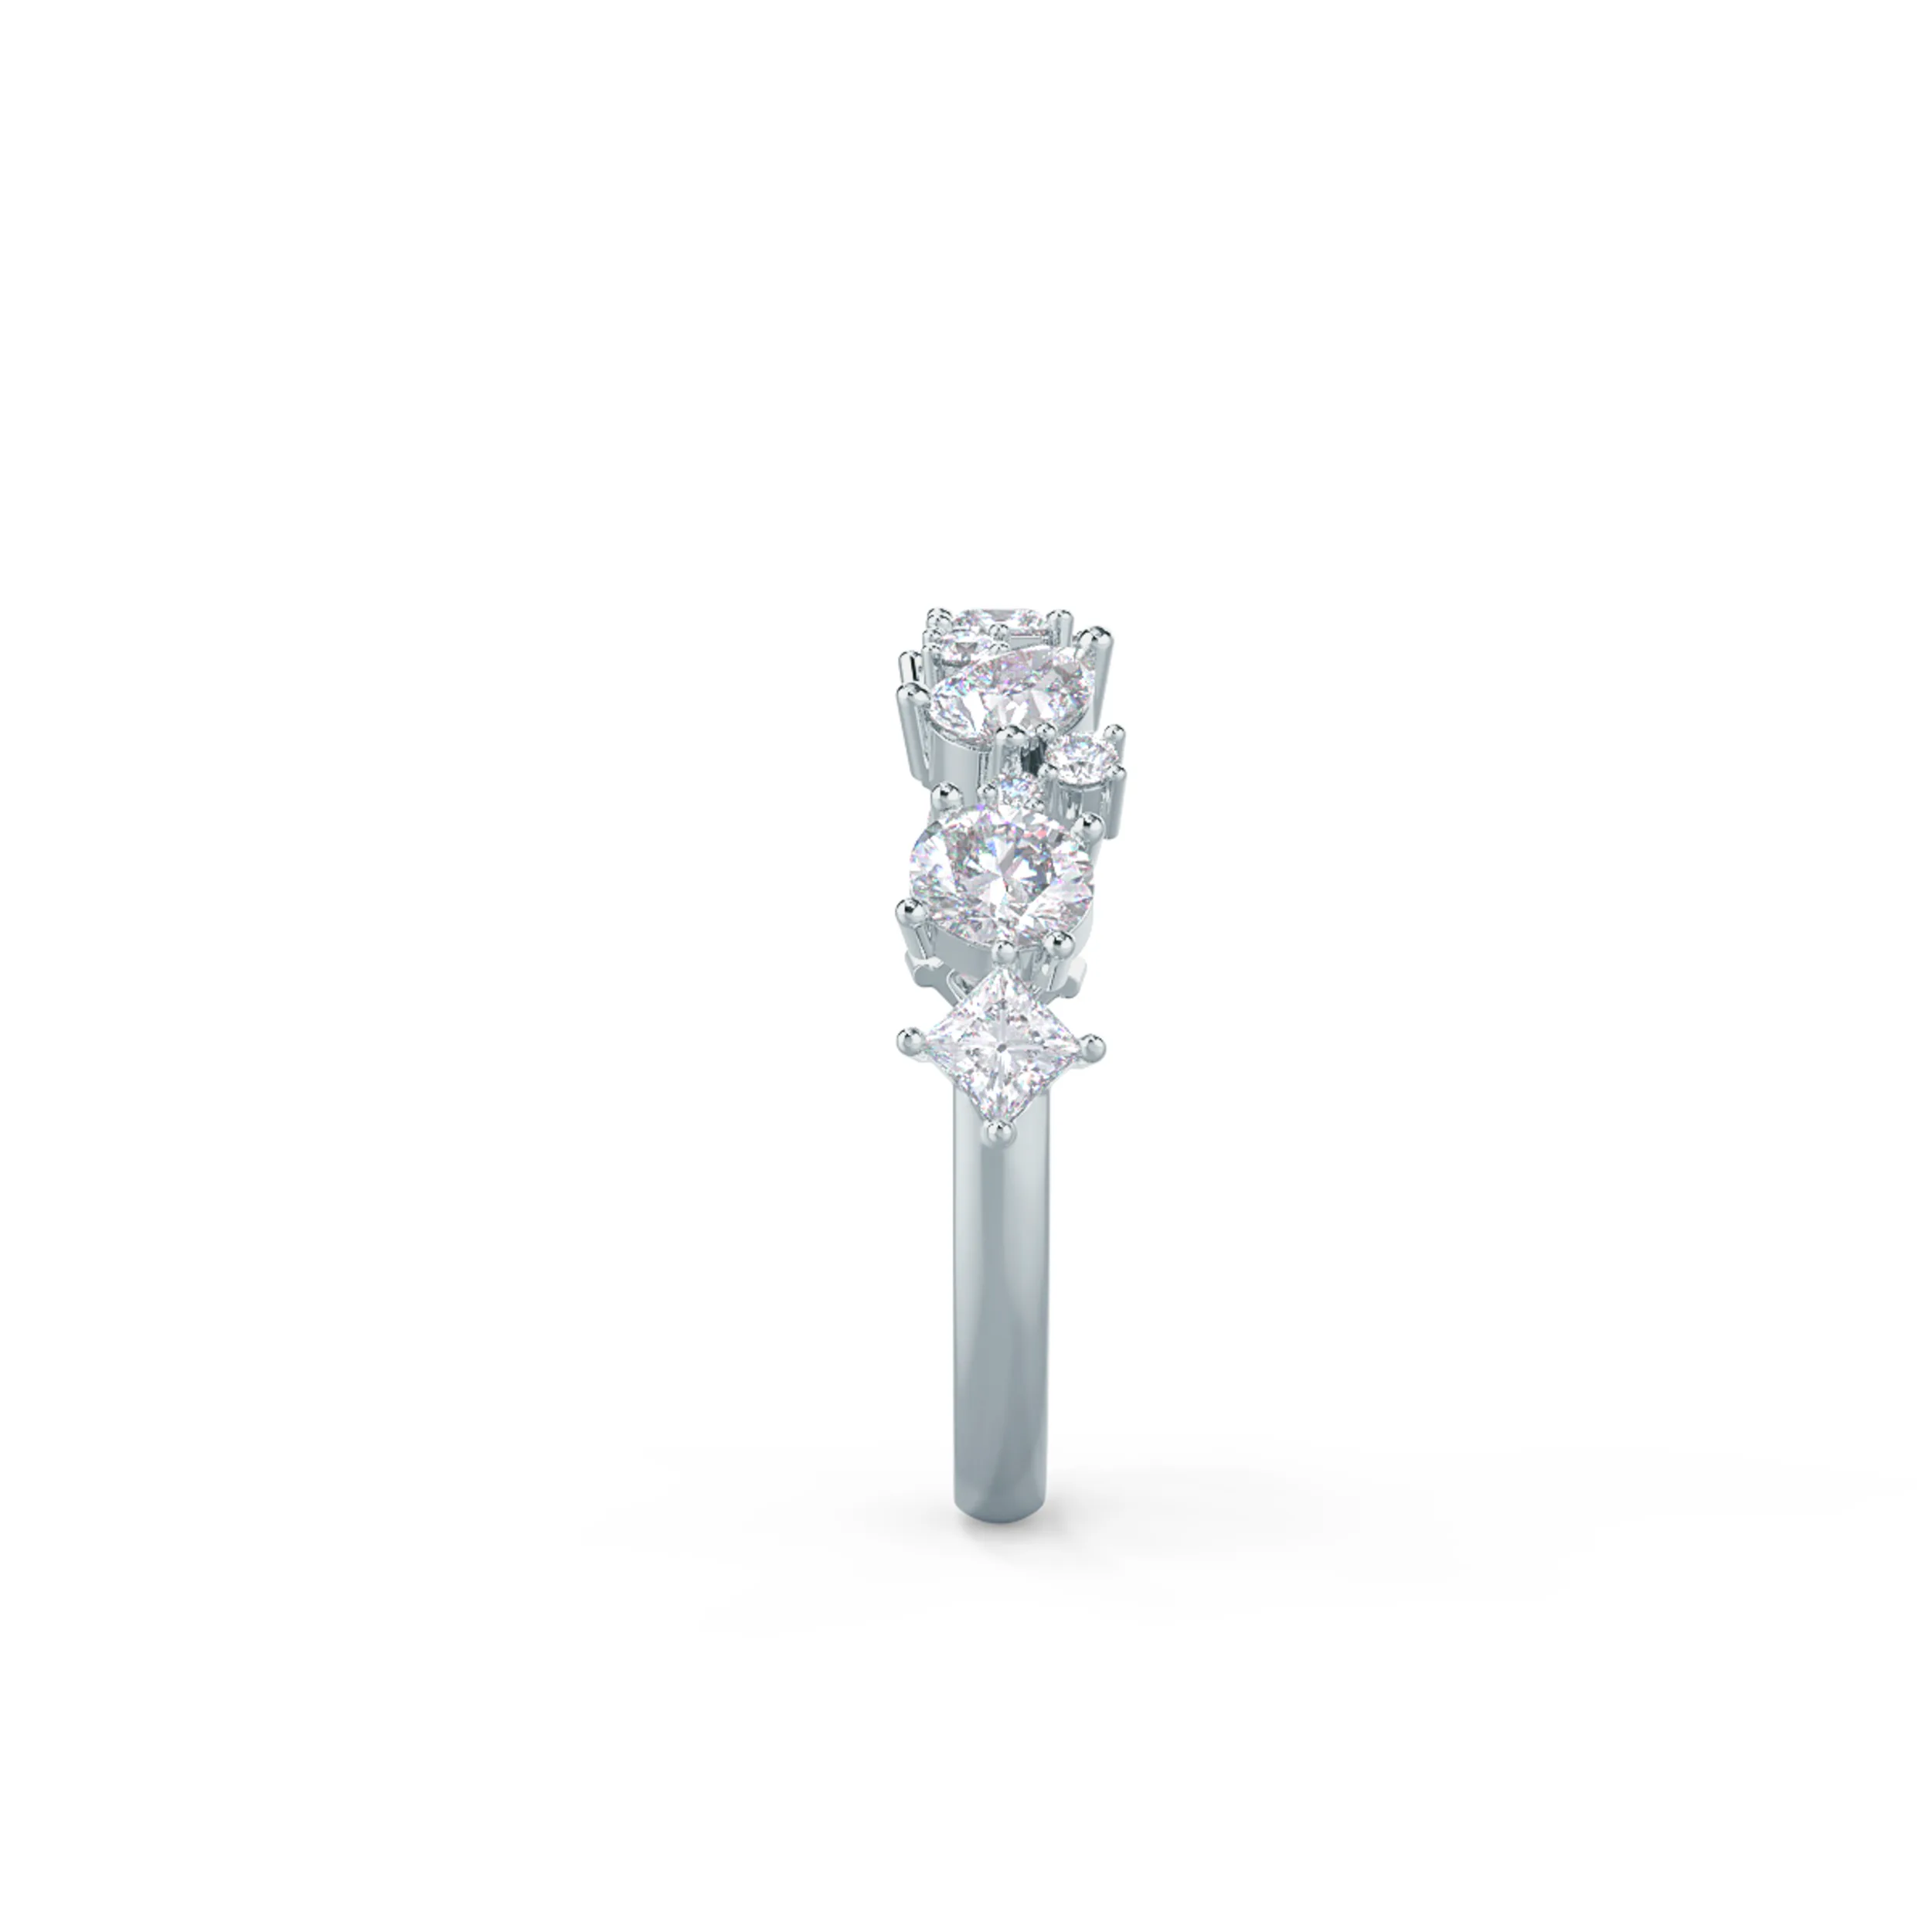 High Quality 1.1 ct Man Made Diamonds set in 18kt White Gold Kelsey Half Band (Side View)